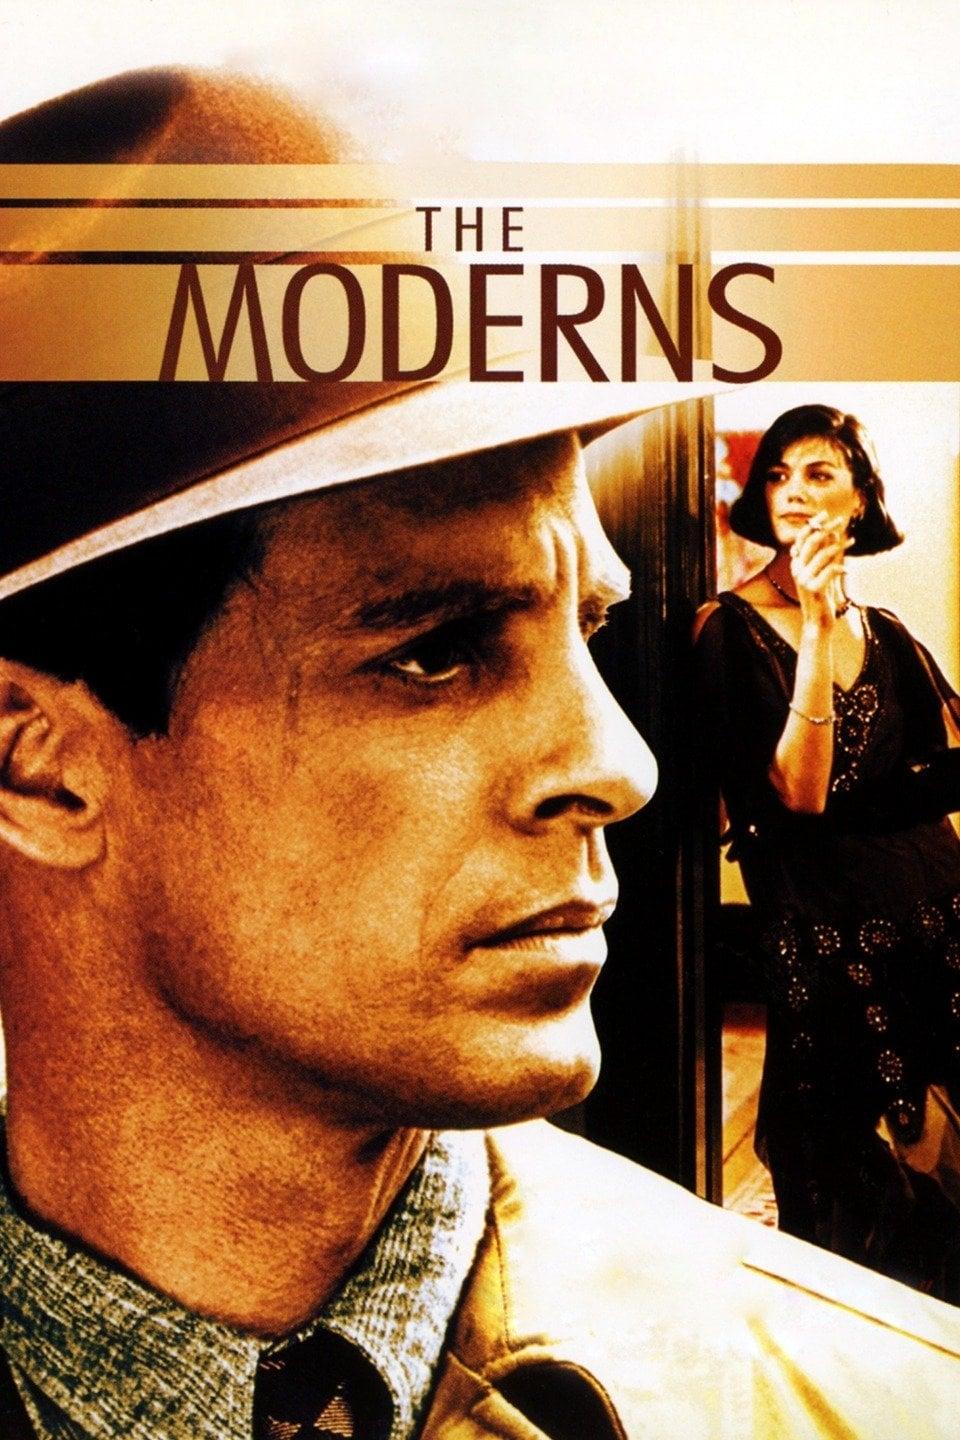 The Moderns poster